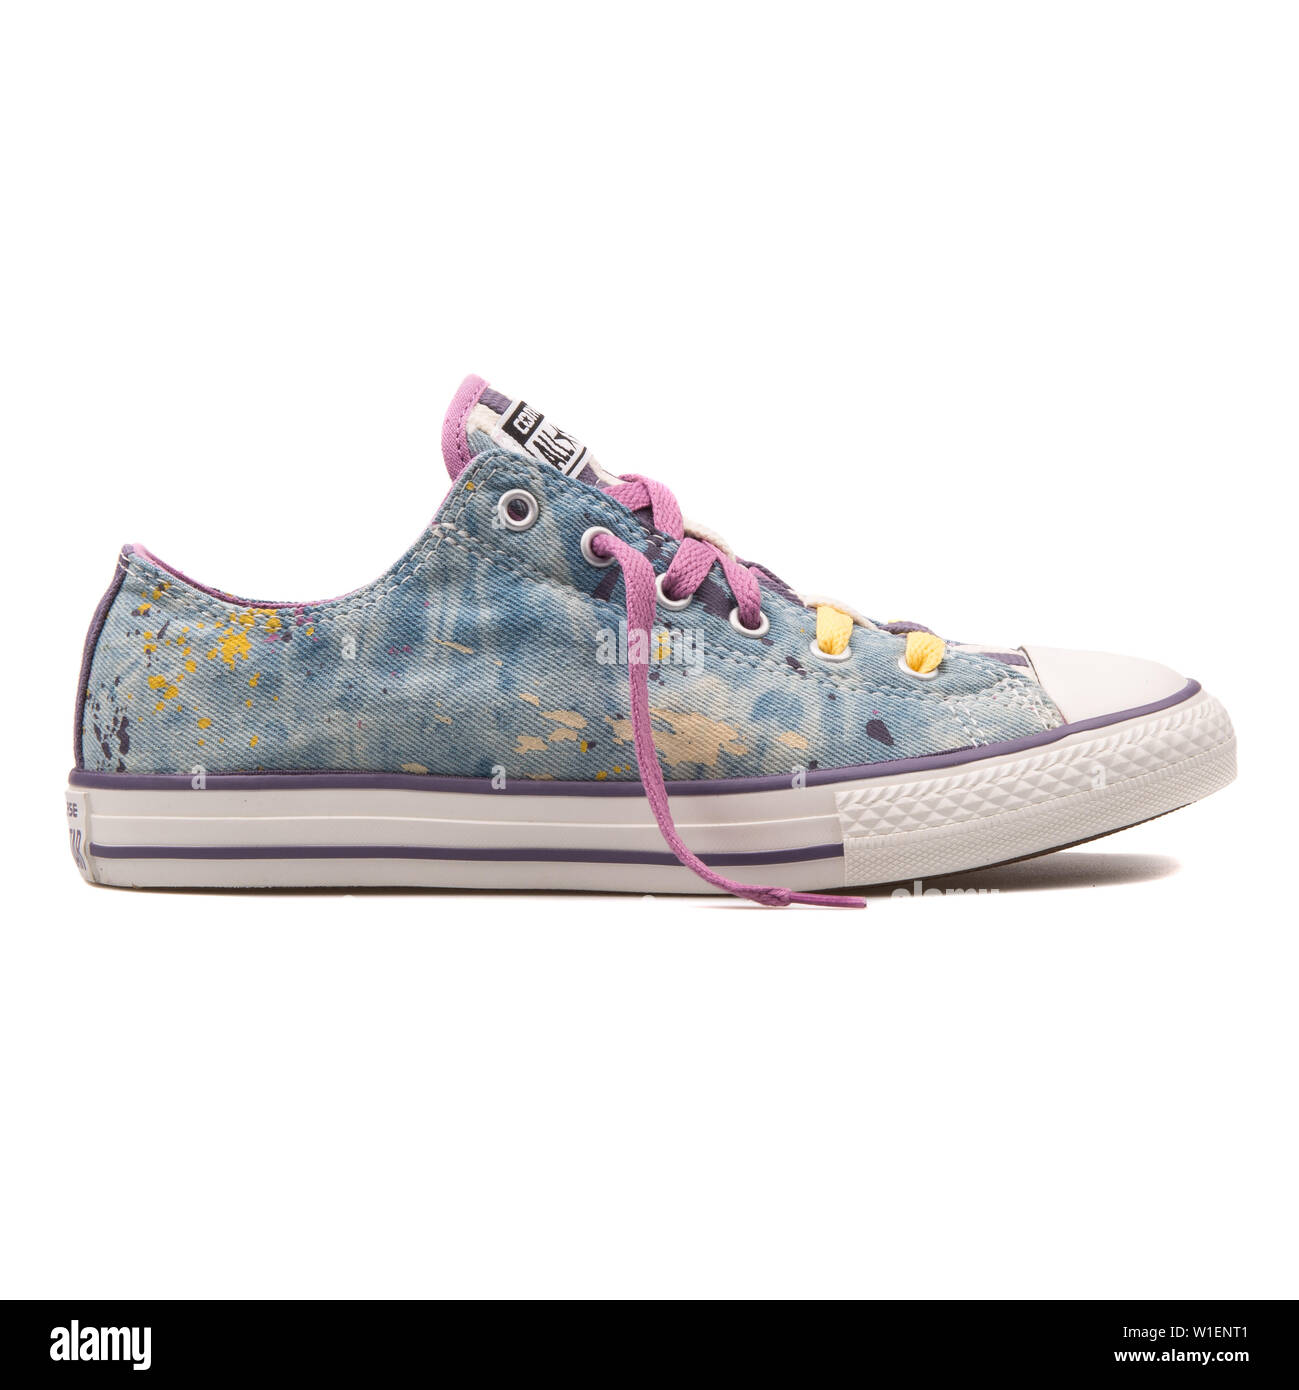 VIENNA, AUSTRIA - AUGUST 10, 2017: Converse Chuck Taylor All Star Loopholes  Slip Moody purple and blue sneaker on white background Stock Photo - Alamy